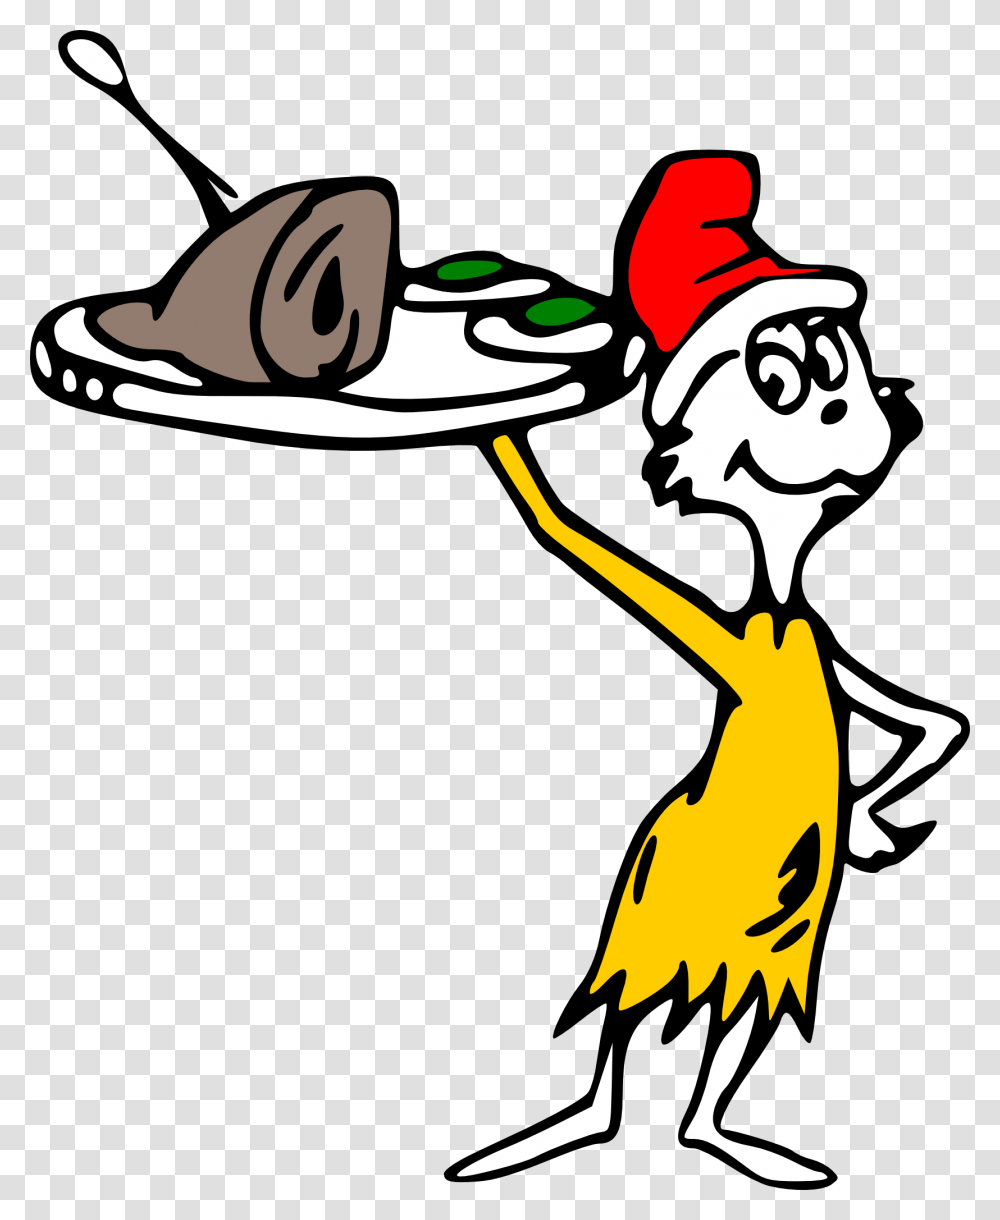 Seuss Clip Art Green Eggs And Ham Preschool Coloring Pages, Waiter, Frisbee, Toy, Bowl Transparent Png